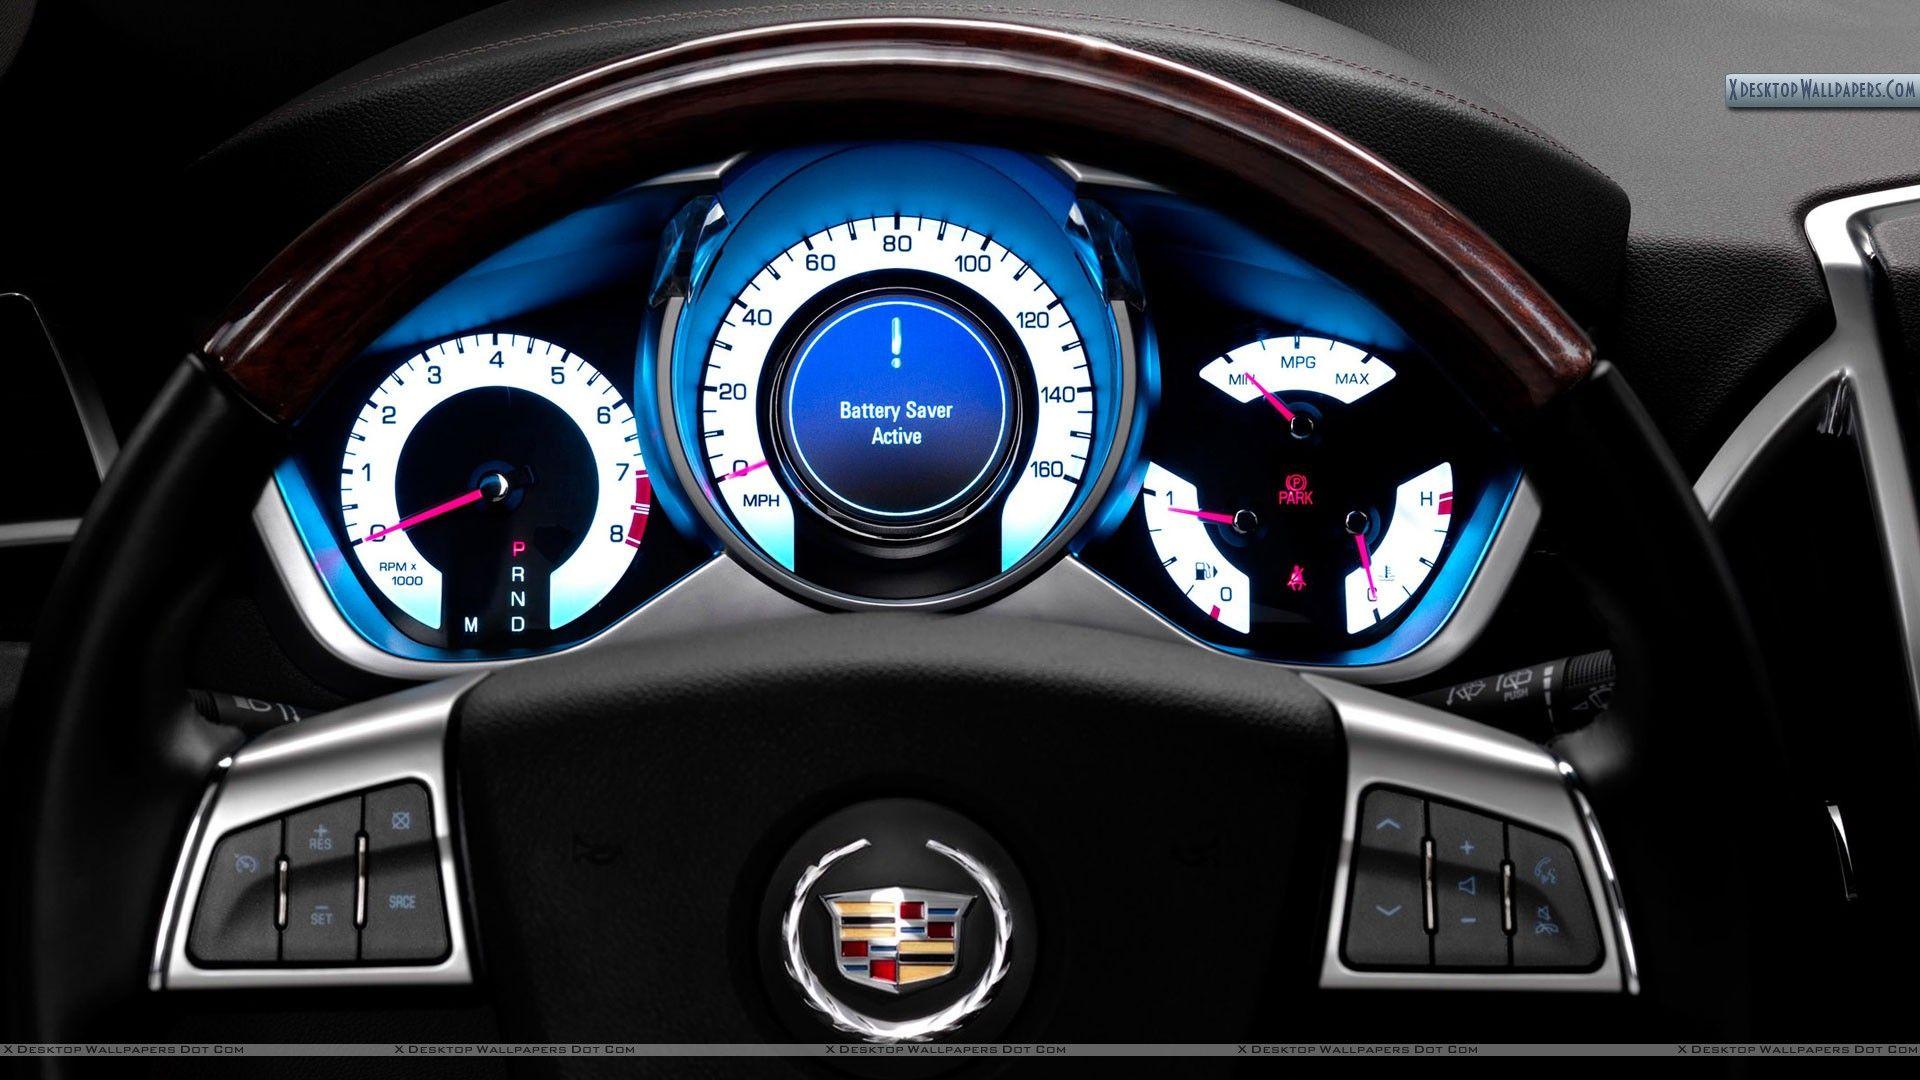 Cadillac Srx Dashboard Wallpaper Background With Car Image High